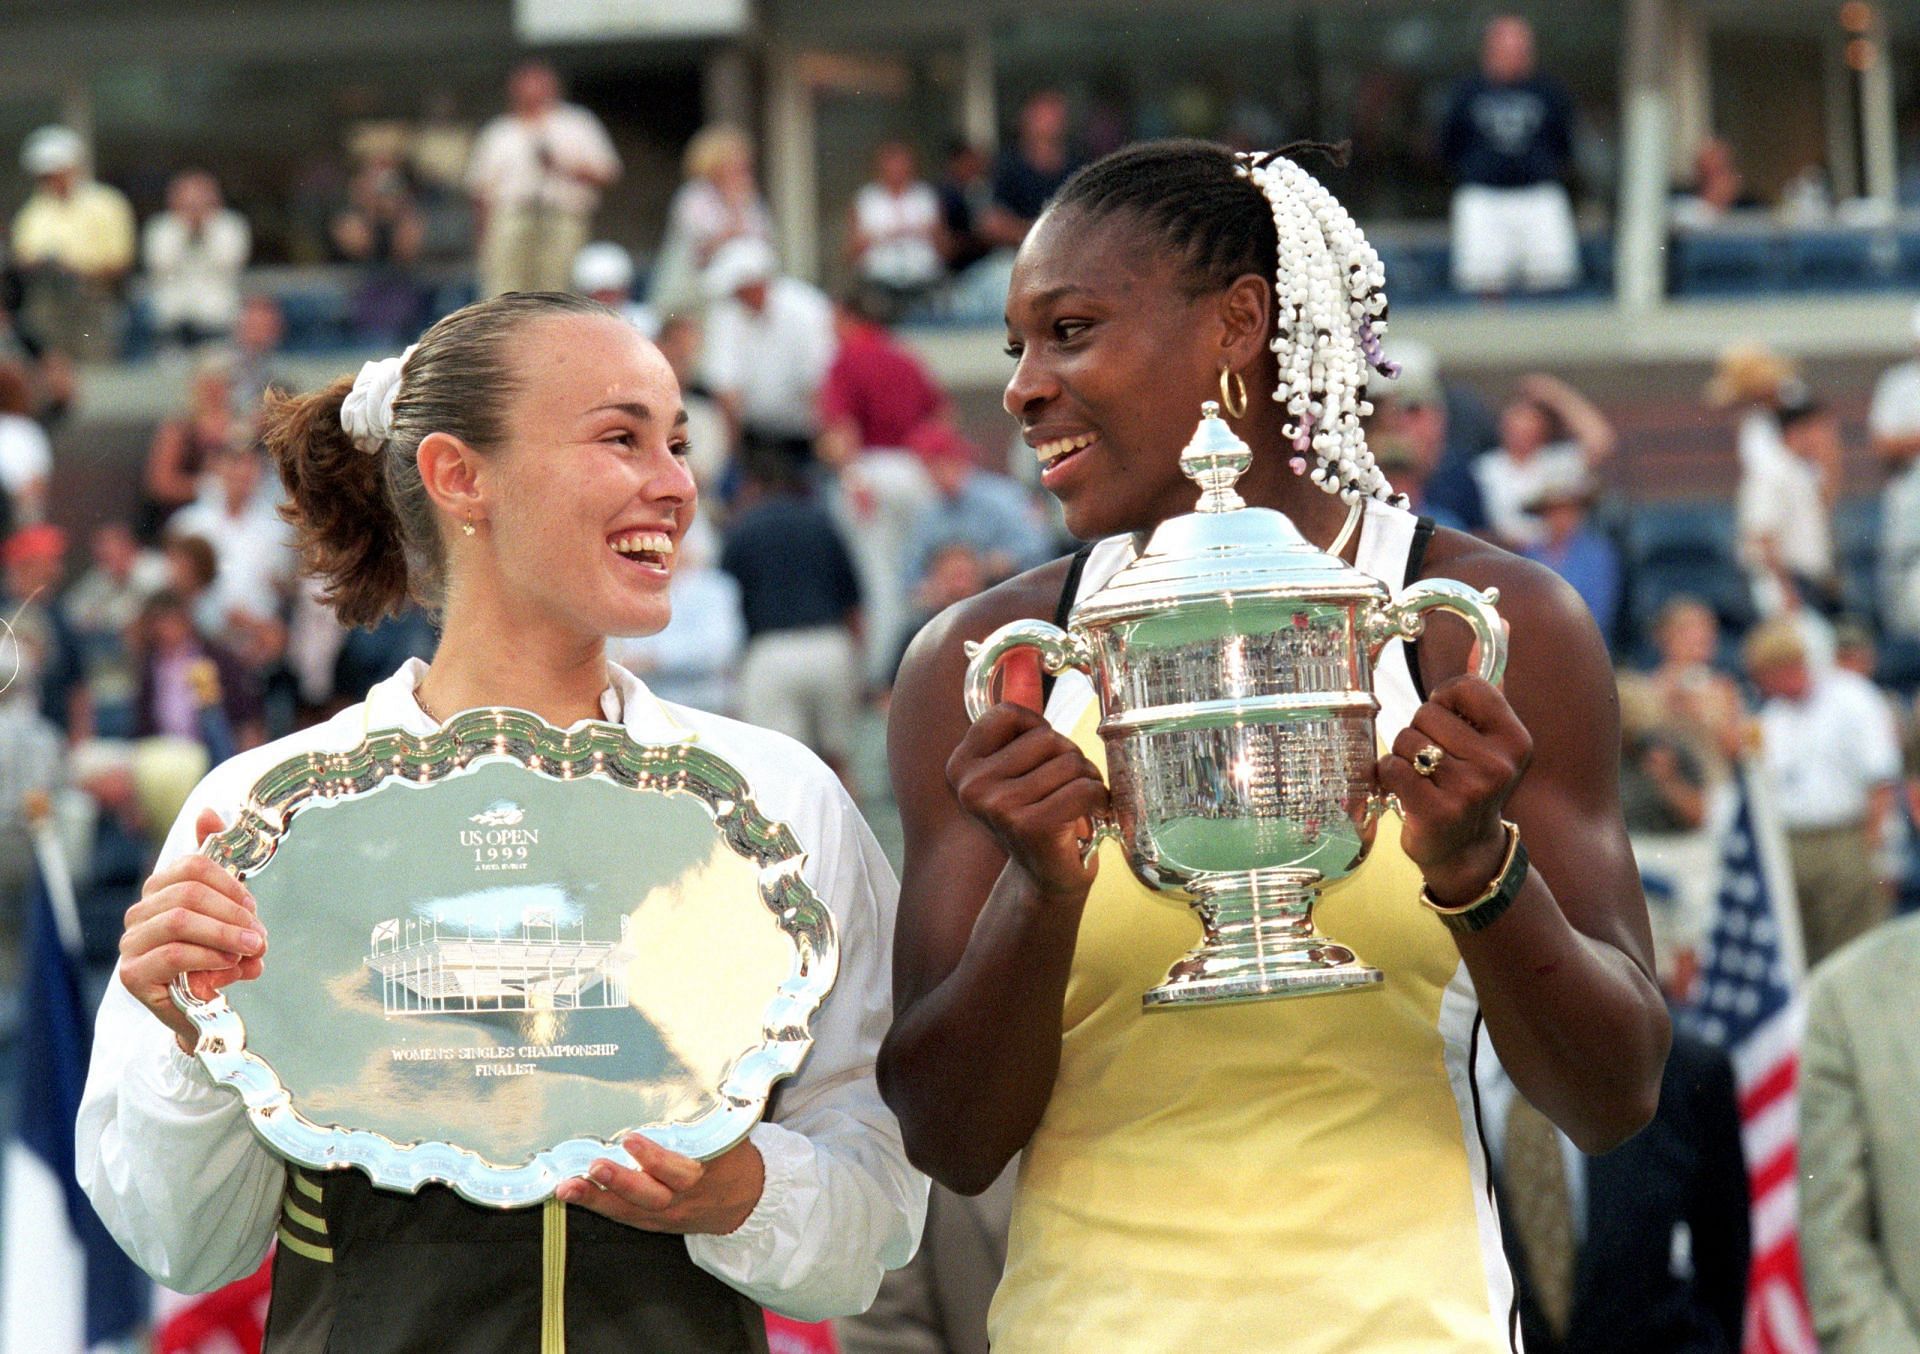 Serena Williams defeated Martina Hingis to win her maiden Grand Slam title at the 1999 US Open